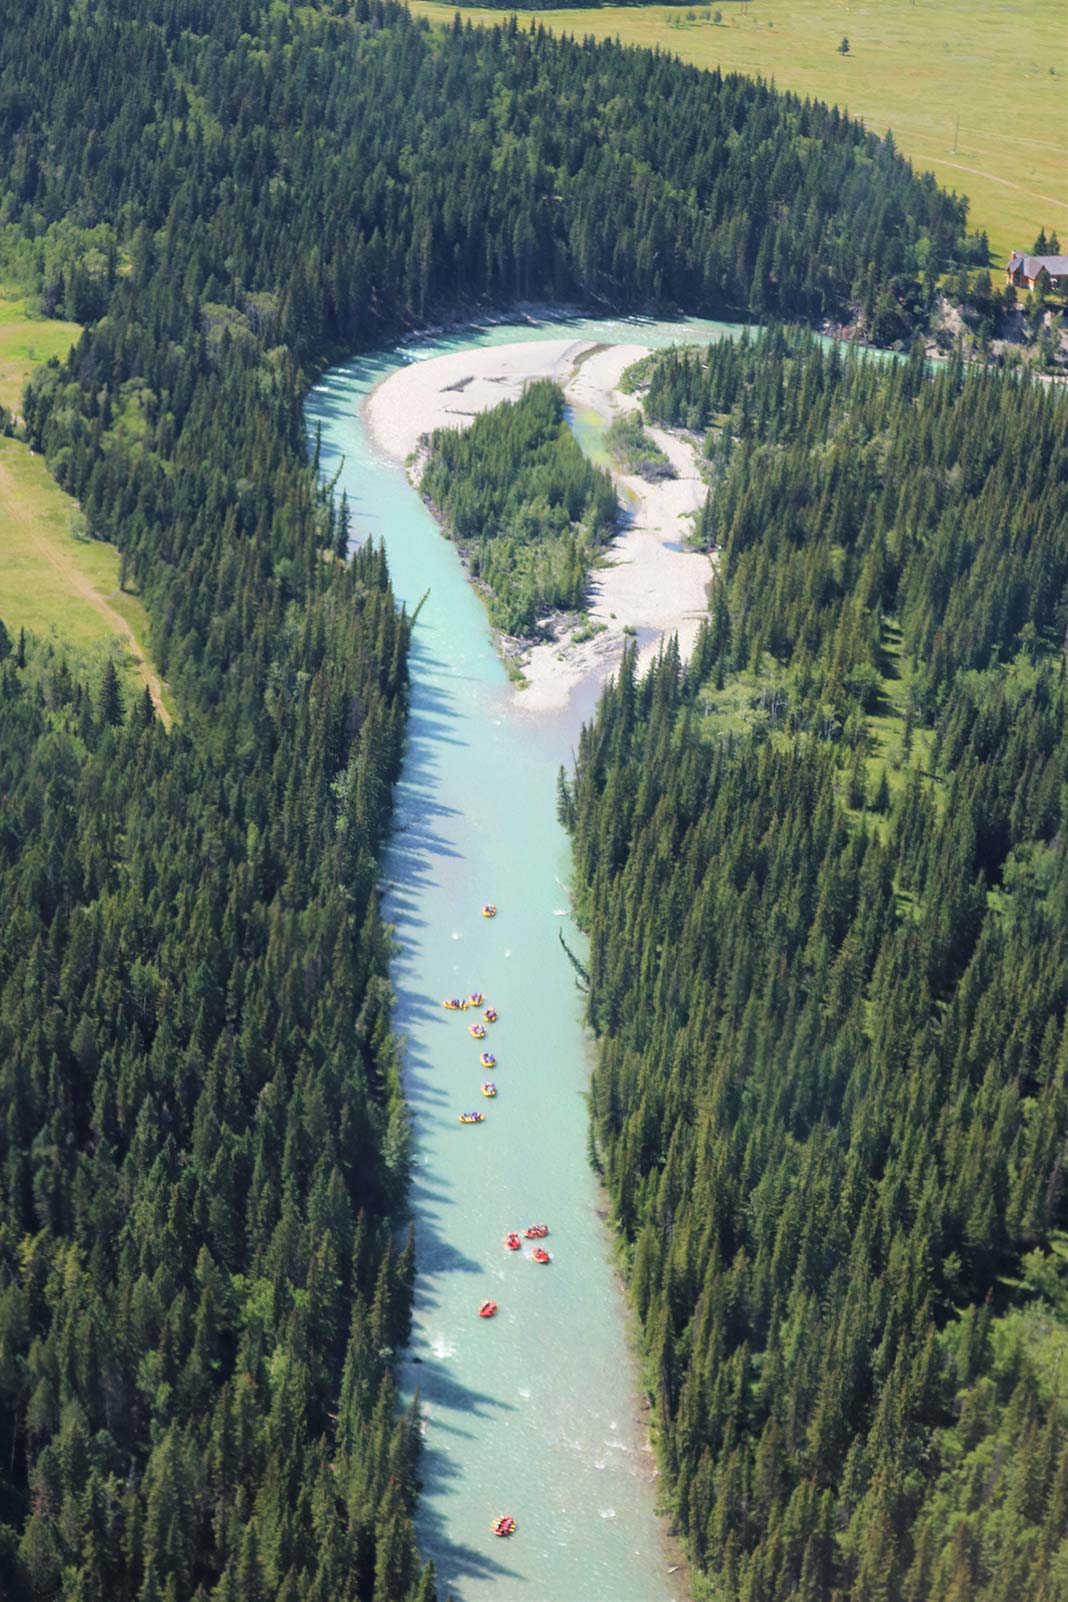 View of Bow River from above with rafts